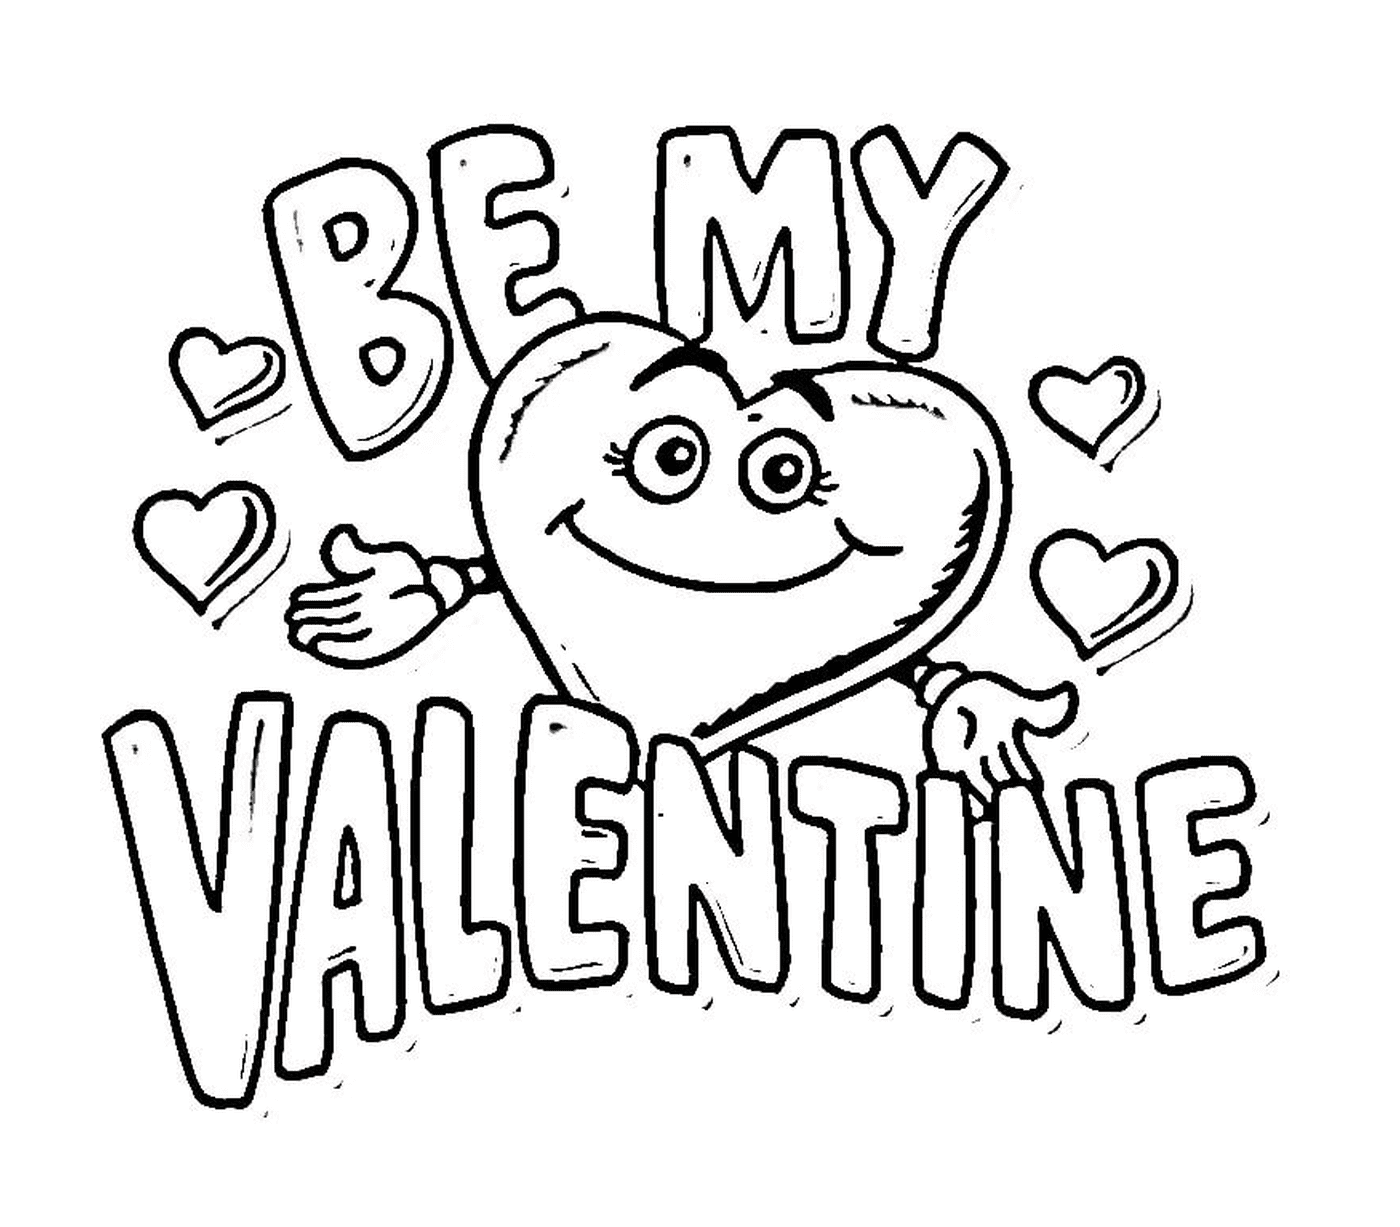  Be my valentine and share my love 